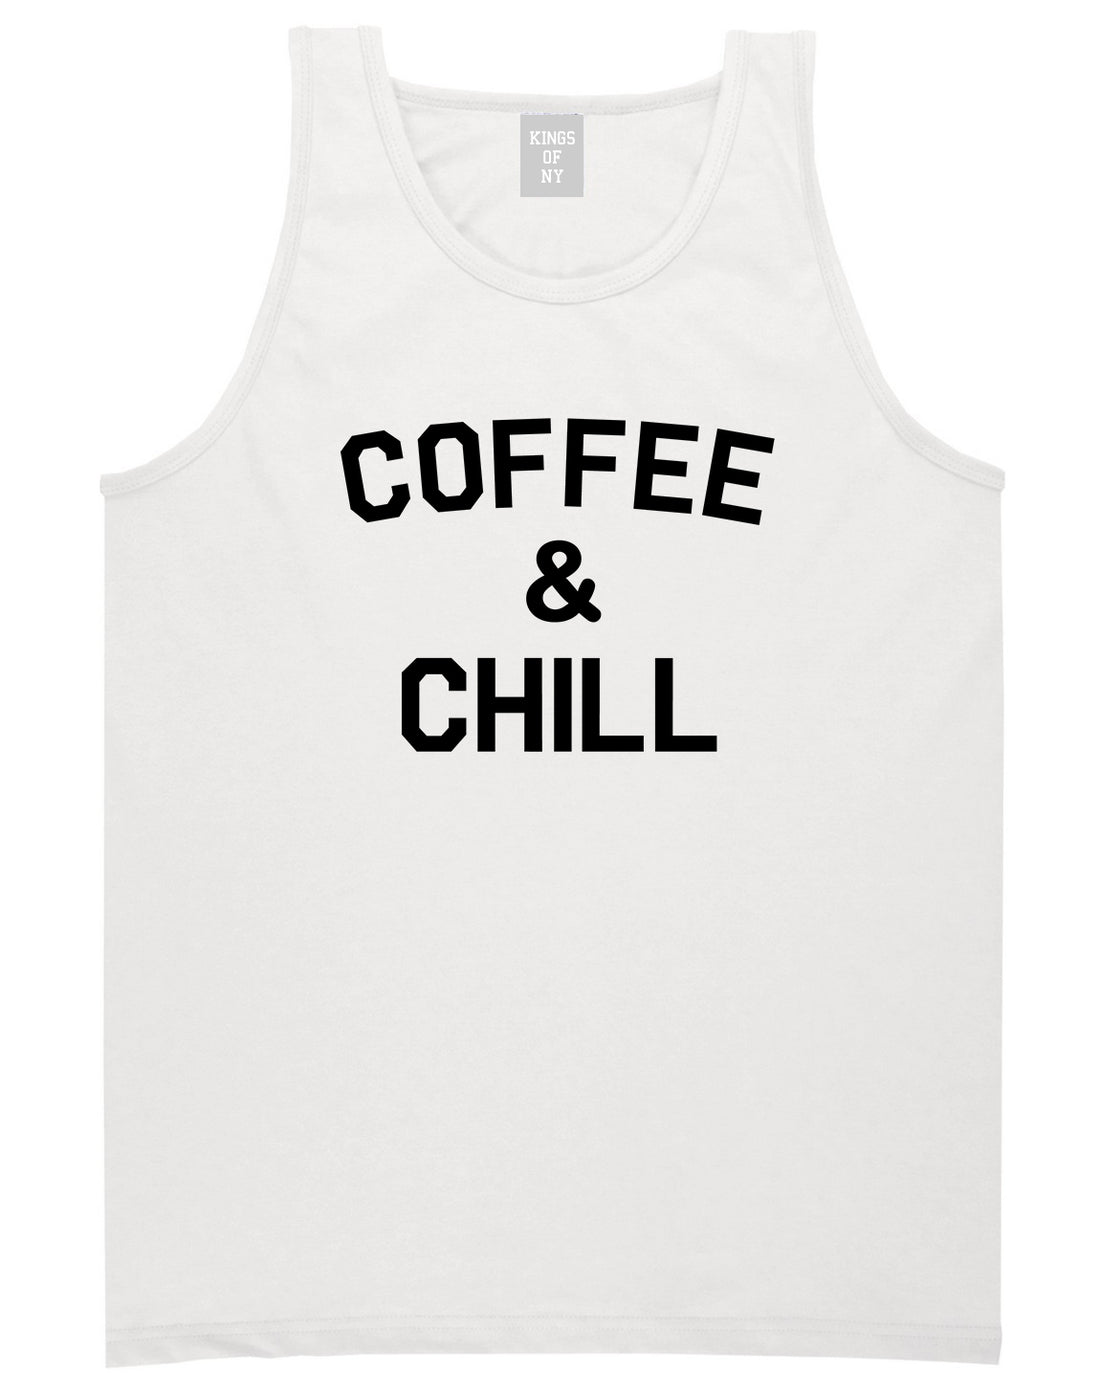 Coffee And Chill Funny Mens Tank Top Shirt White